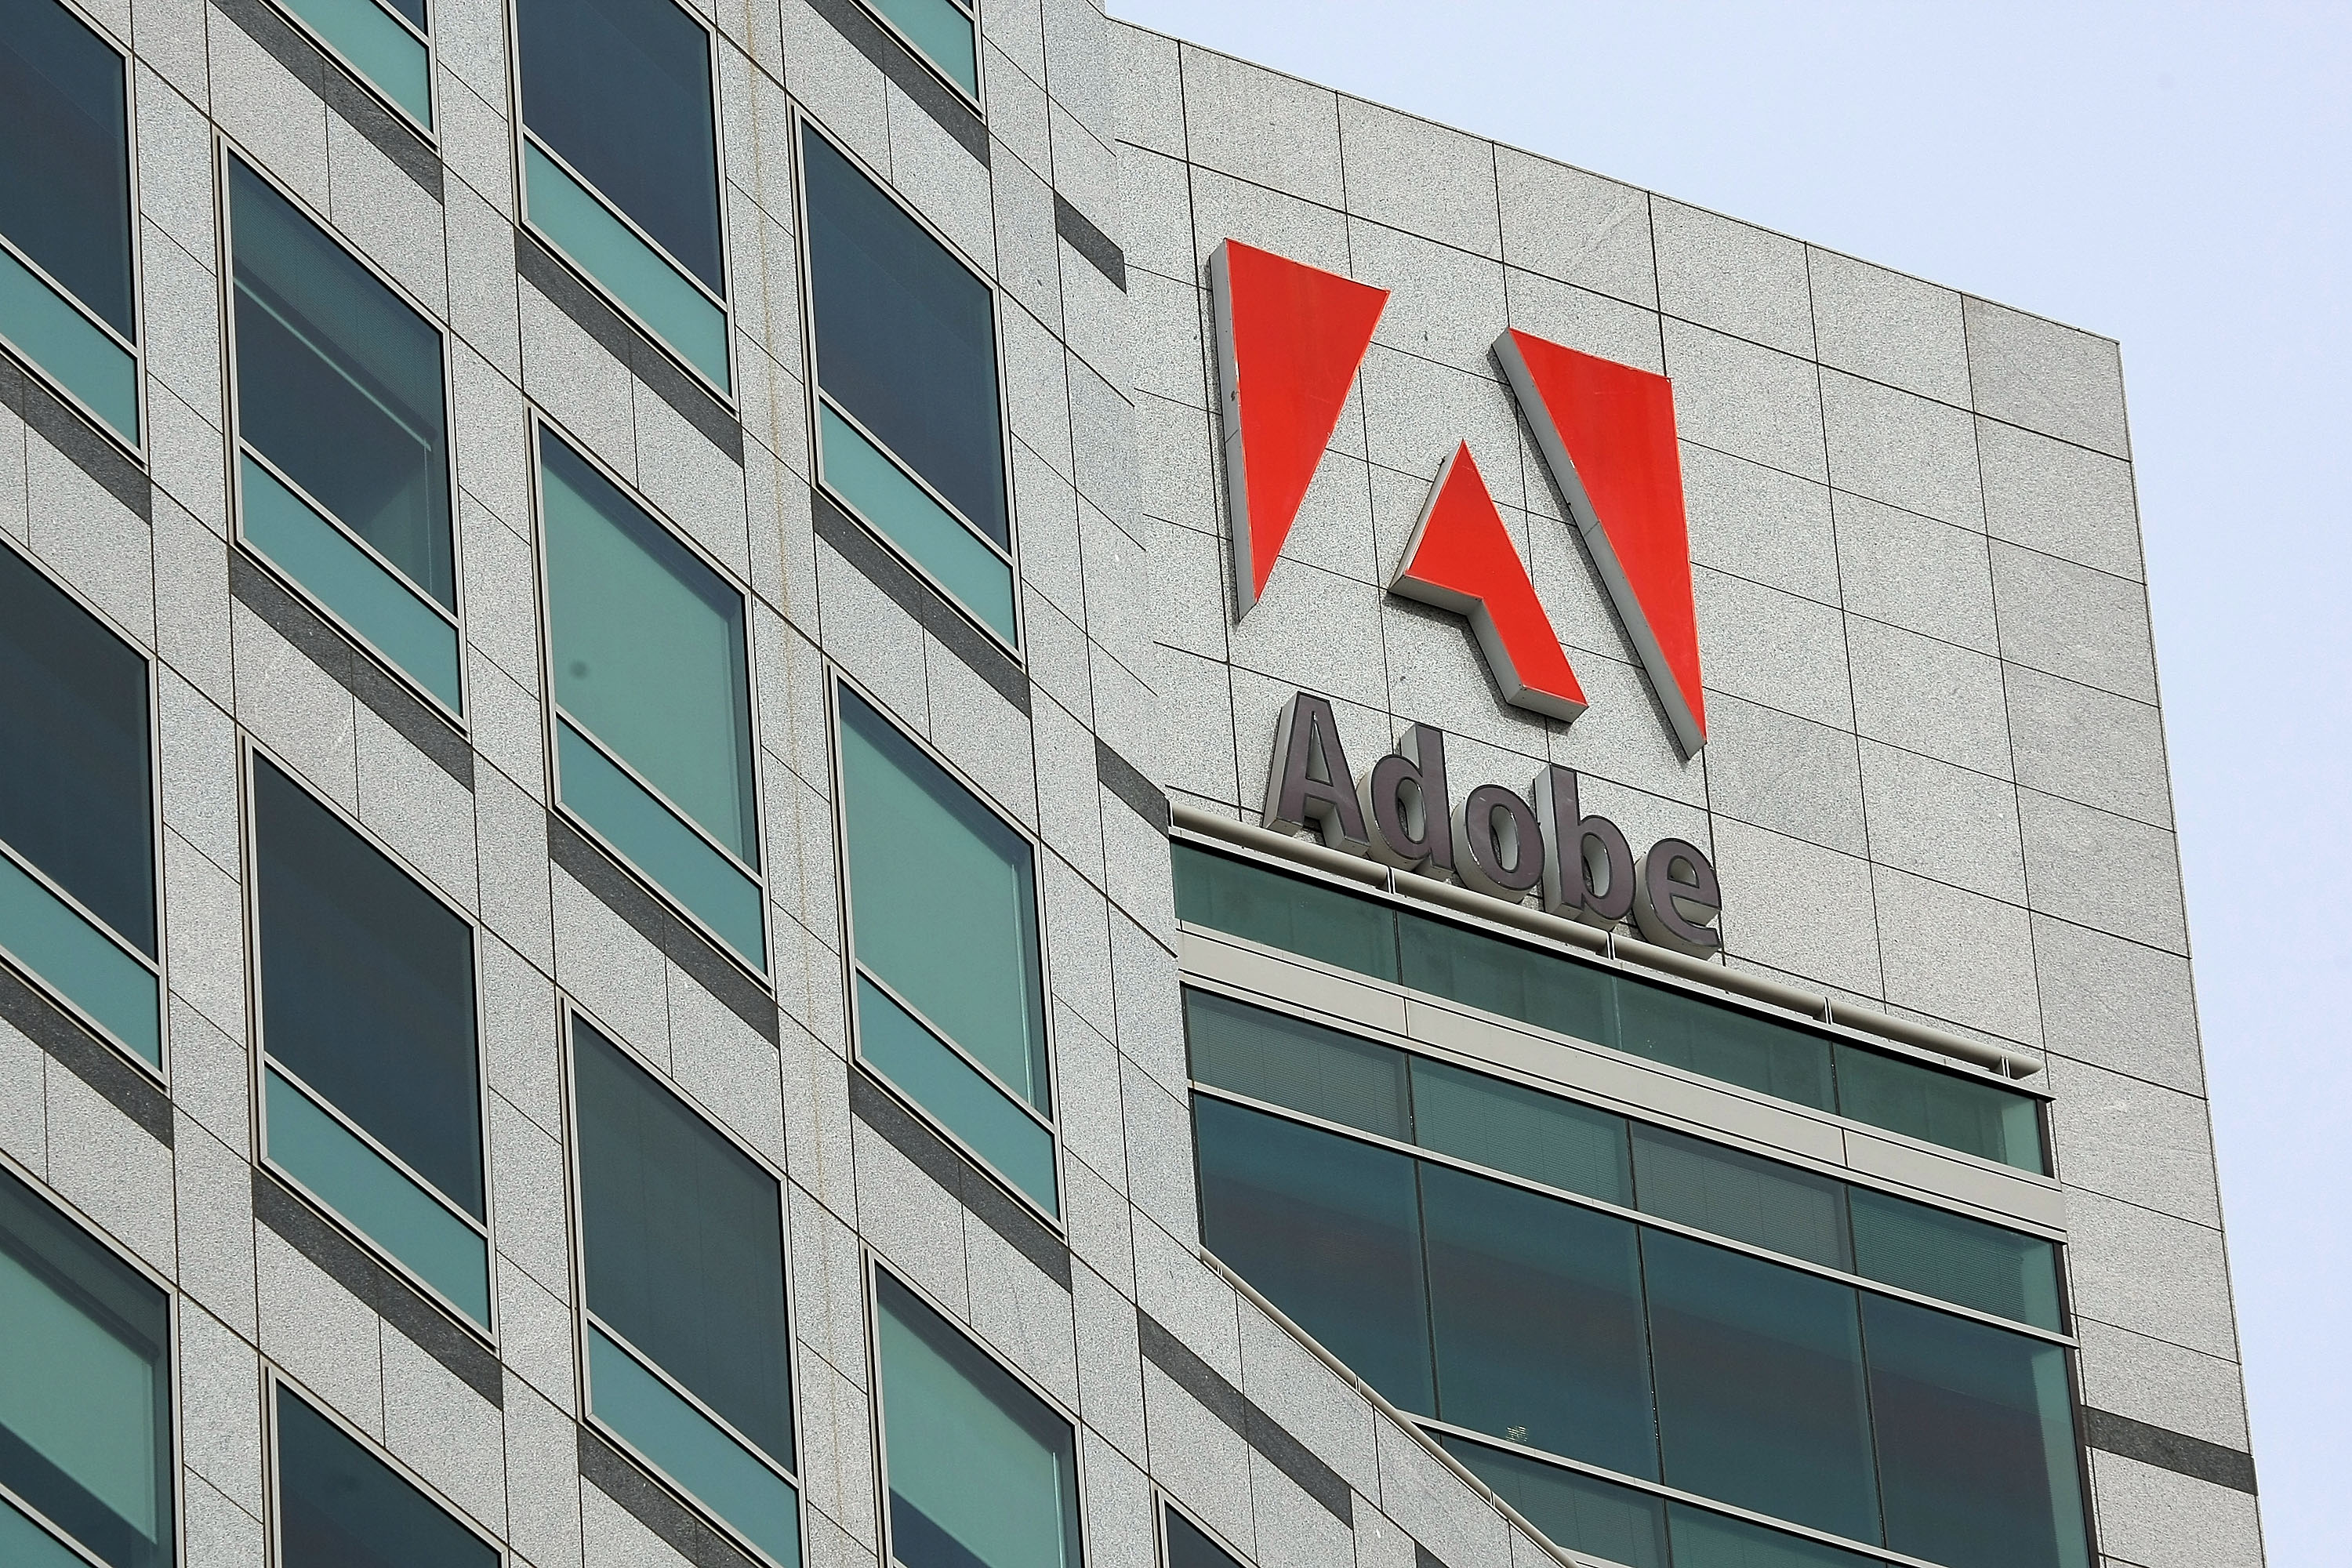 The Adobe logo is displayed on the side of the Adobe Systems headquarters January 15, 2010 in San Jose, California. Adobe Systems has added 20 new wind turbines to their rooftops in an attempt to harness wind energy to help power their offices. (Justin Sullivan—Getty Images)